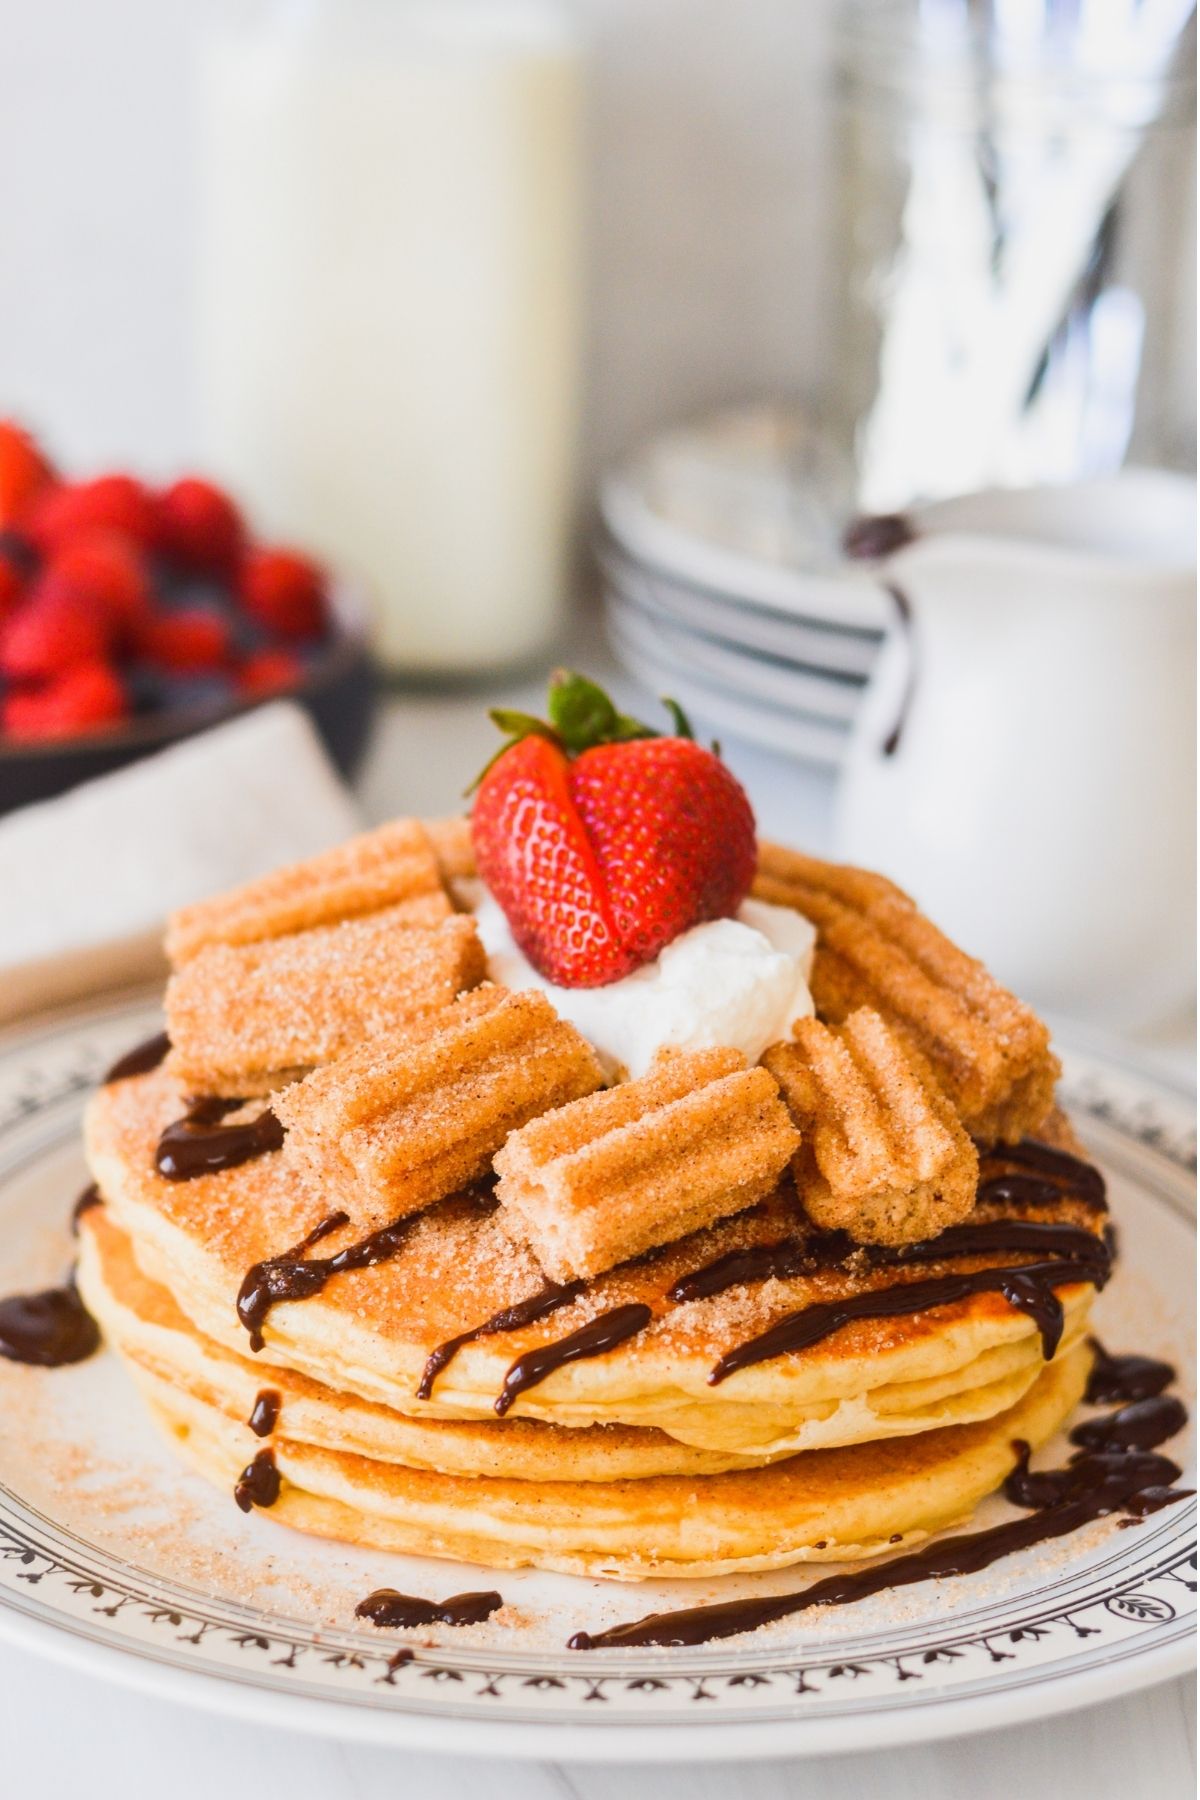 Churro Pancakes are brushed with melted butter, cinnamon sugar and drizzled with a cinnamon chocolate sauce and churro bites.